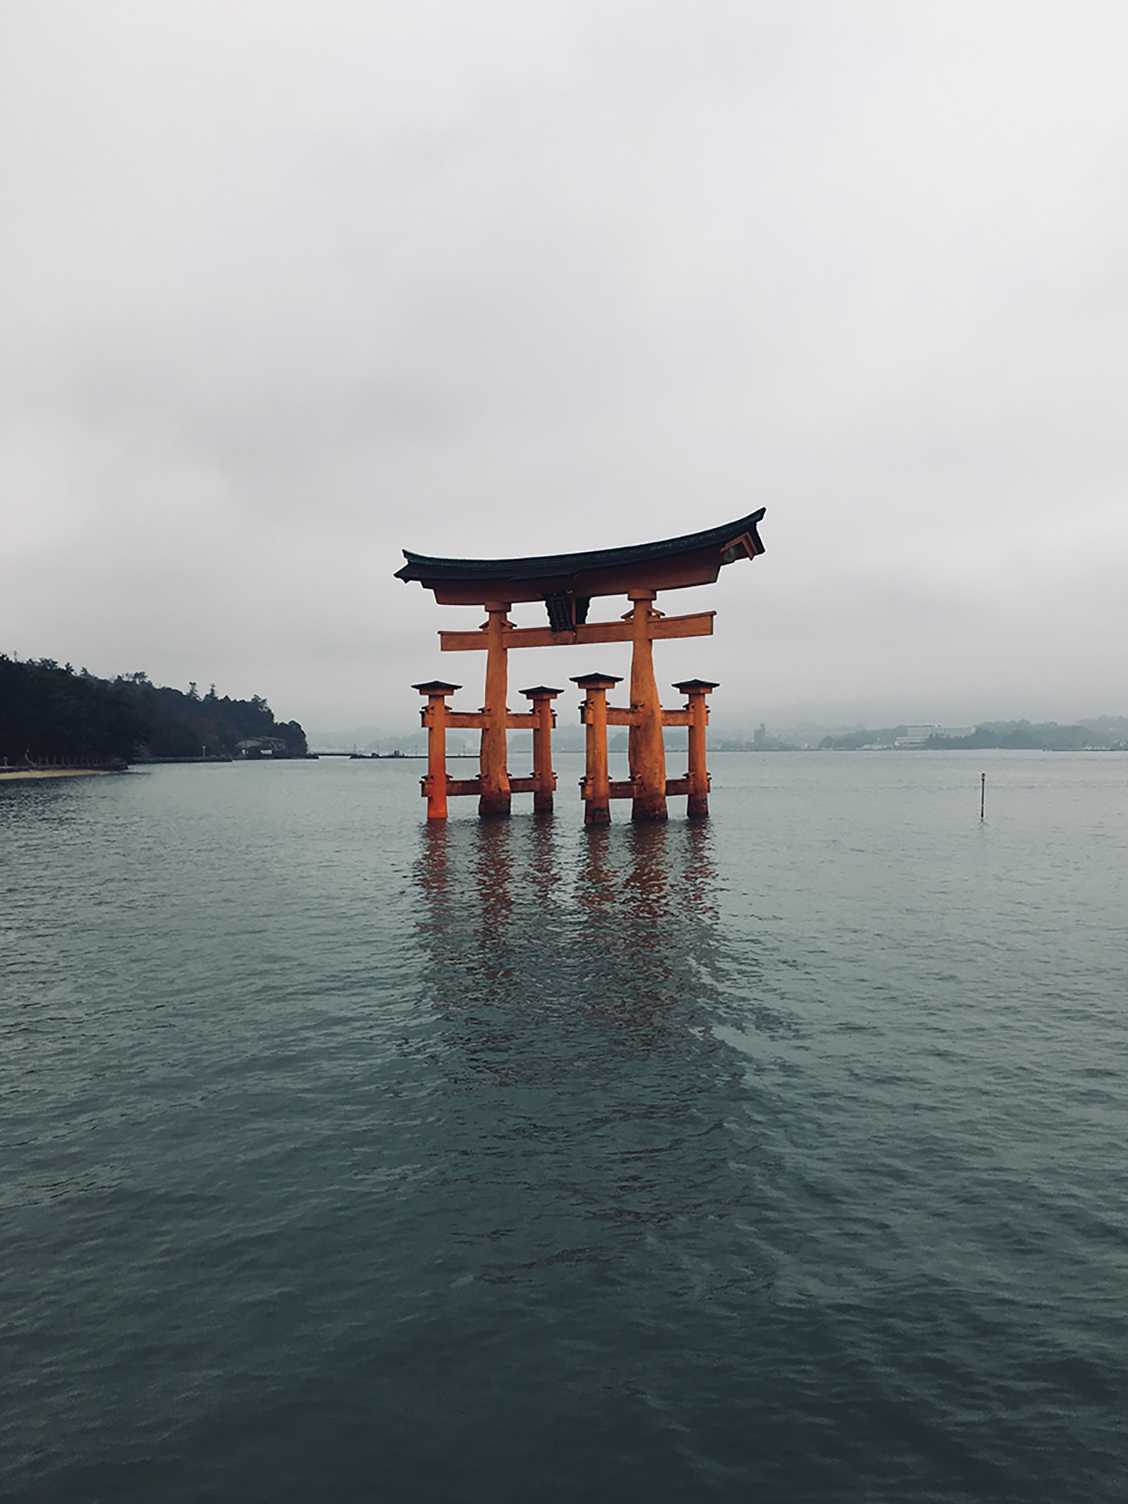 ITSUKUSHIMA+SHRINE+This+floating+gate+is+the+main+tourist+attraction+of+Miyajima+Island%2C+which+is+a+short+ferry+ride+away+from+Hiroshima.+This+UNESCO+World+Heritage+site+is+especially+beautiful+at+high+tide%3B+the+island+is+also+home+to+several+deer+and+many+small+vendors+selling+authentic+Japanese+goods.